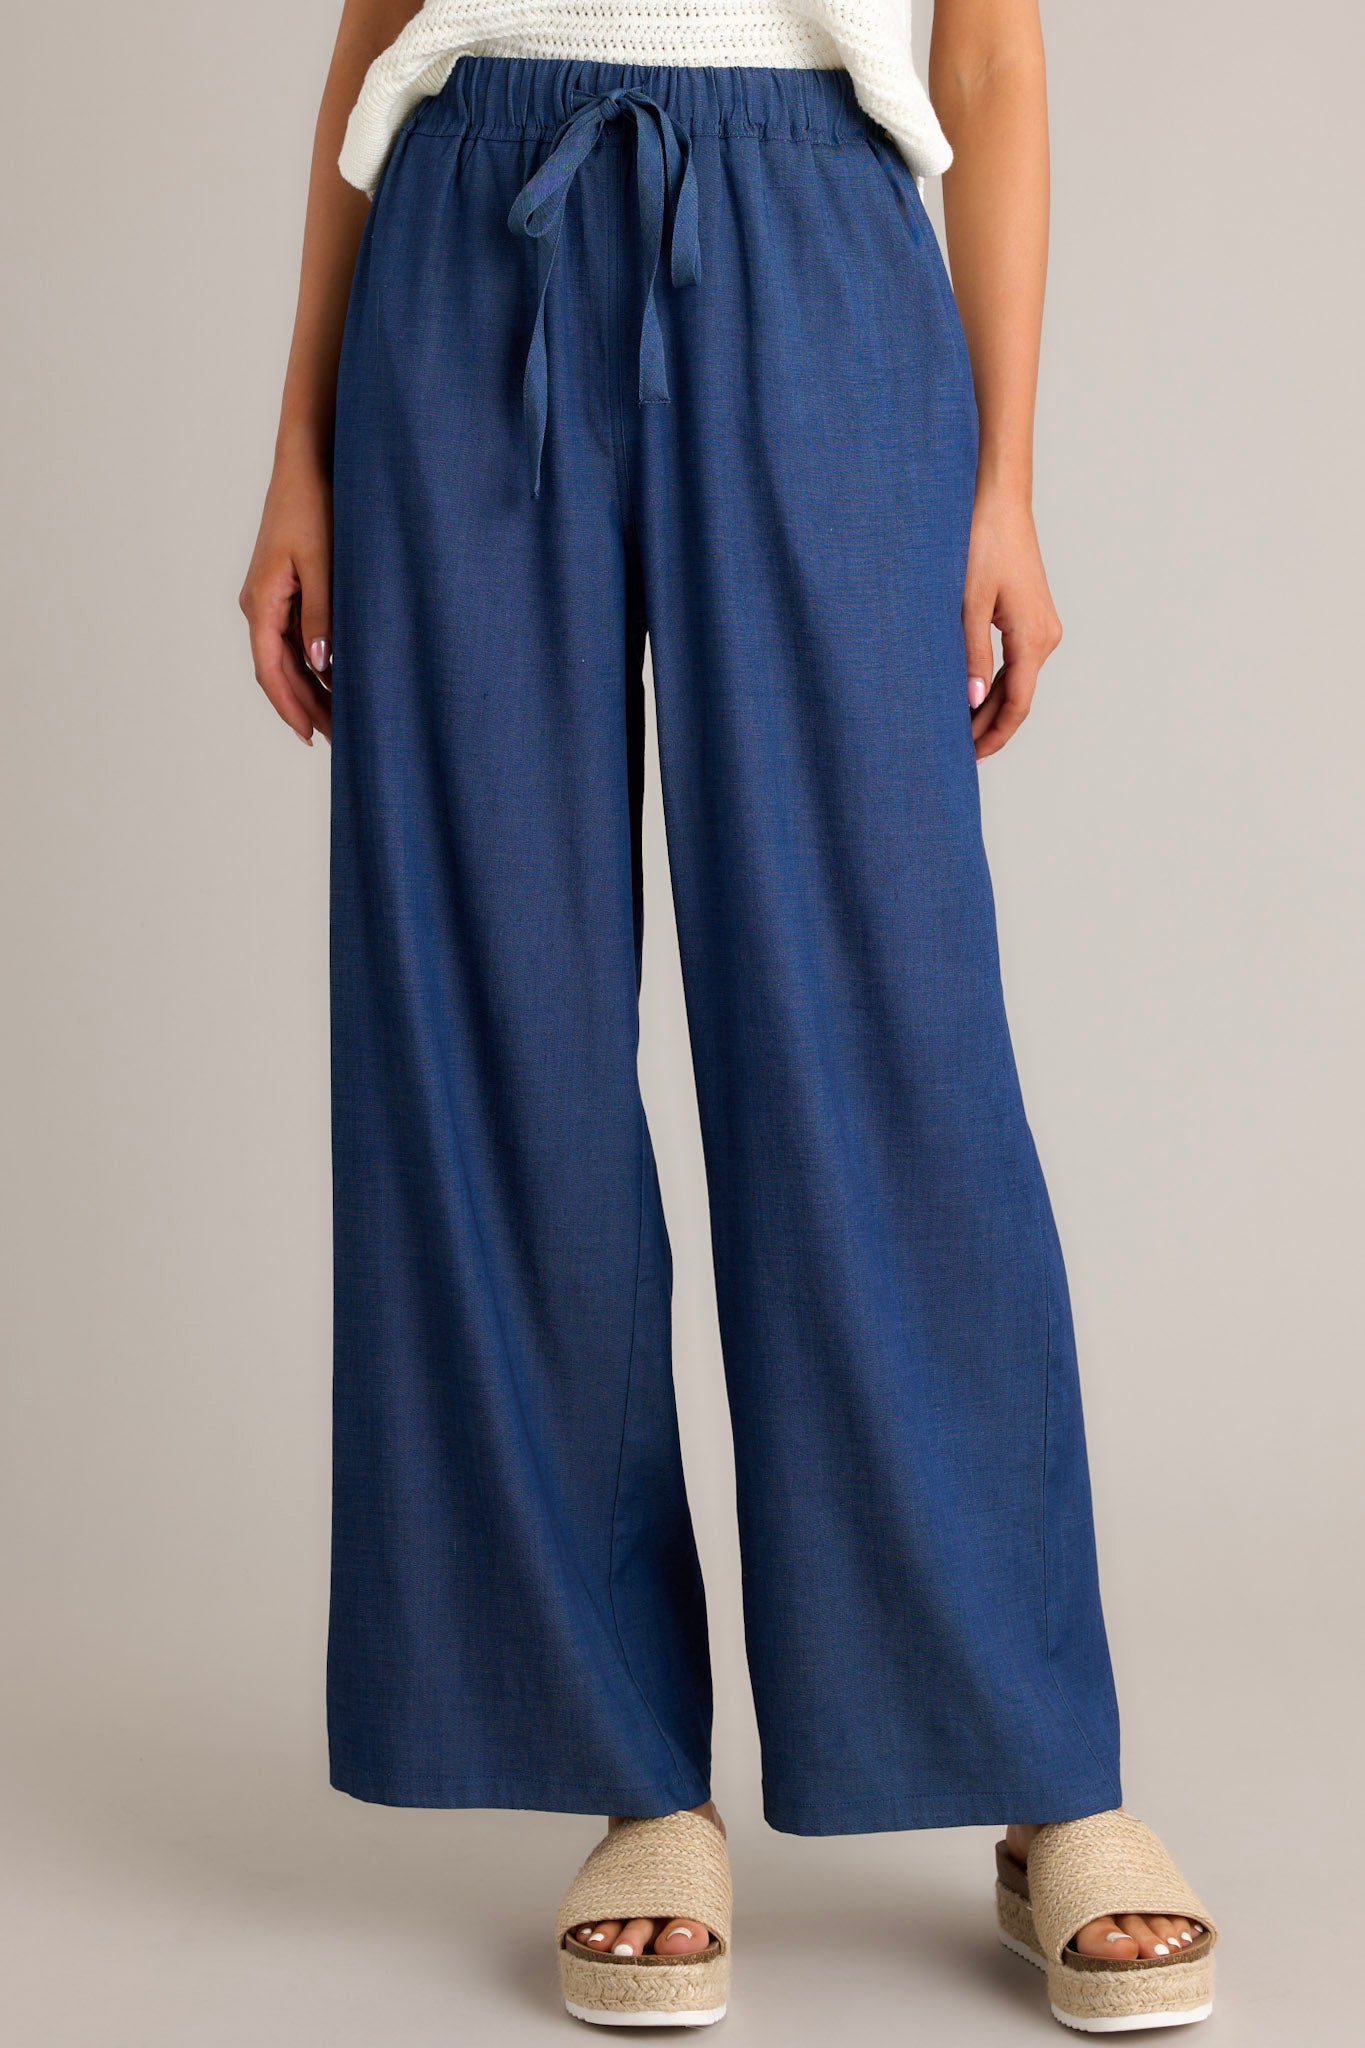 Full length view of dark chambray pants with a high waisted design, an elastic waistband, a self-tie drawstring, functional hip pockets, and a wide leg